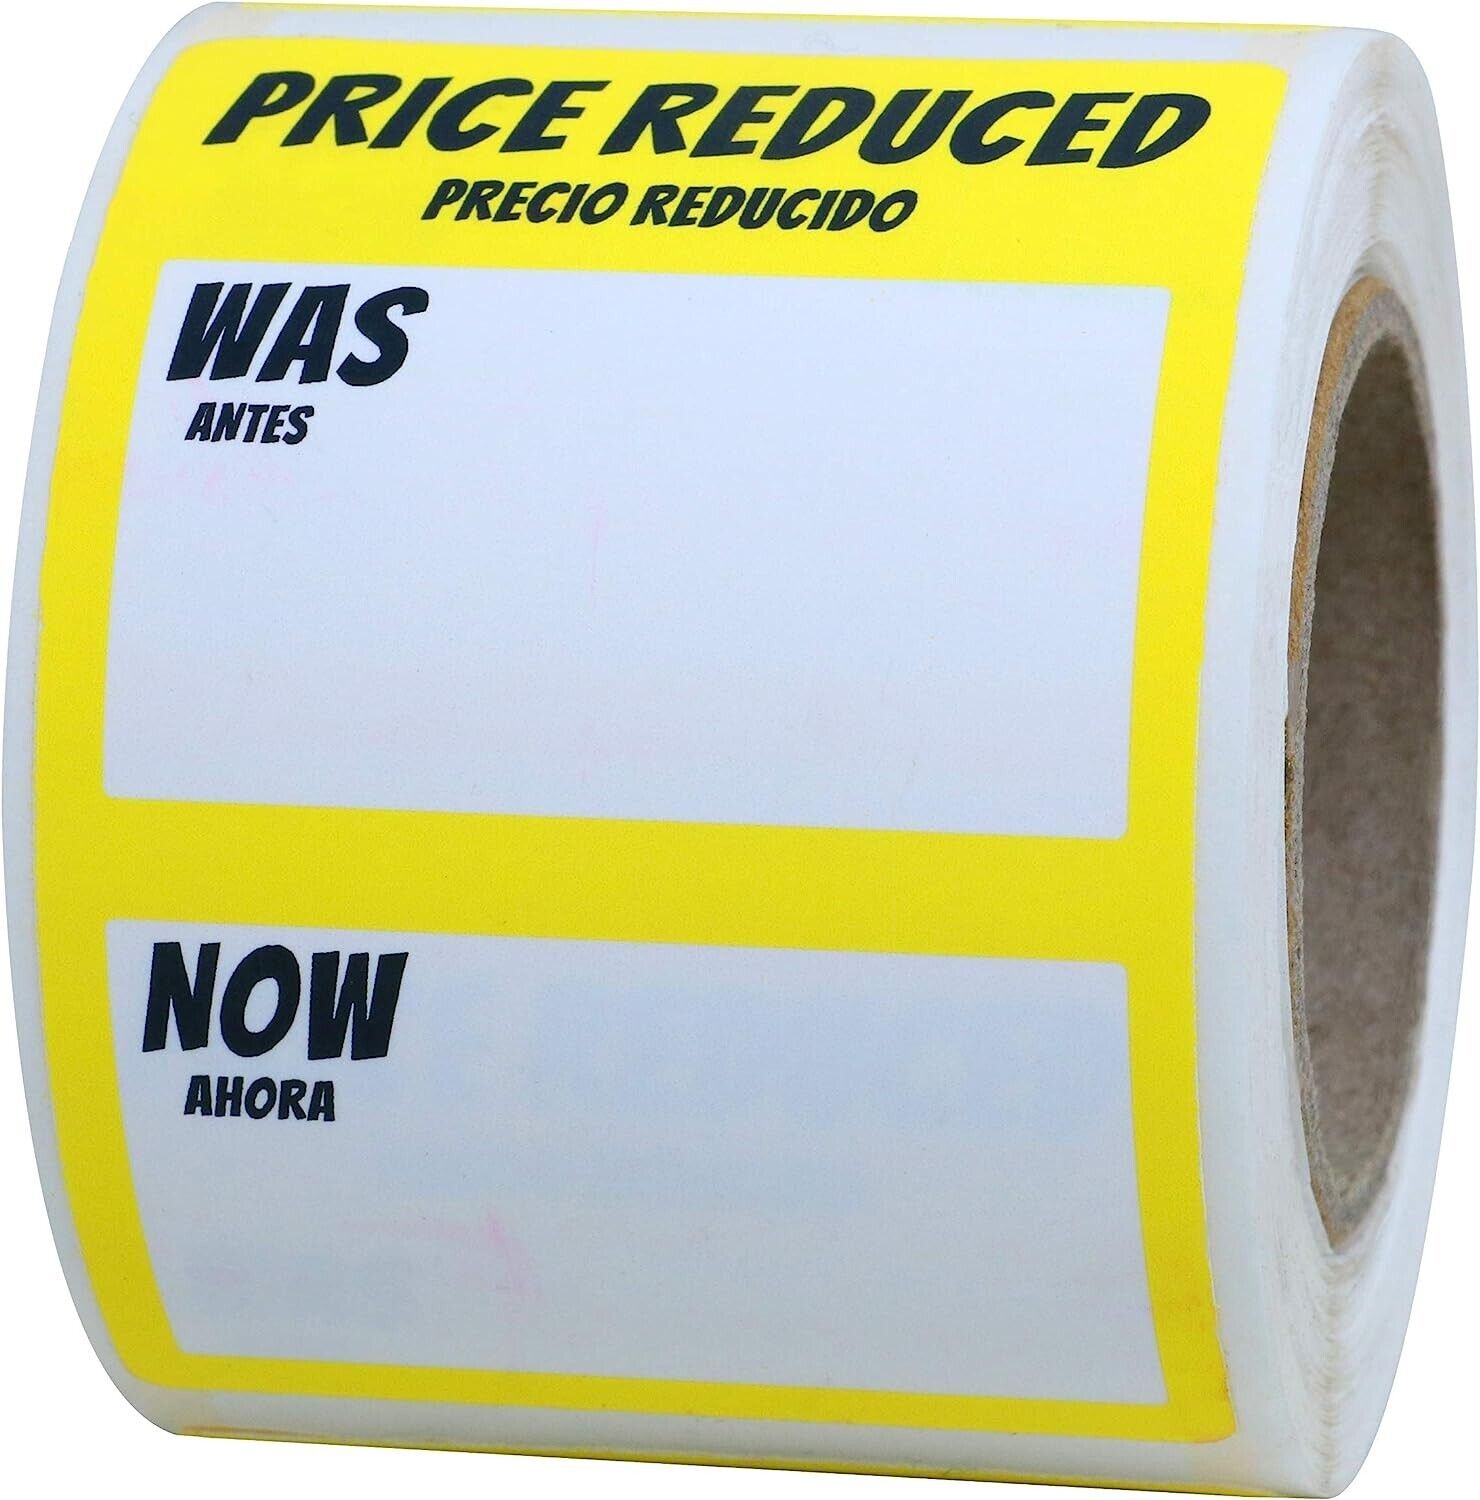 1 Roll 500 Labels Price Reduced Retail Grocery Market Stickers, 2 x 3 Inches